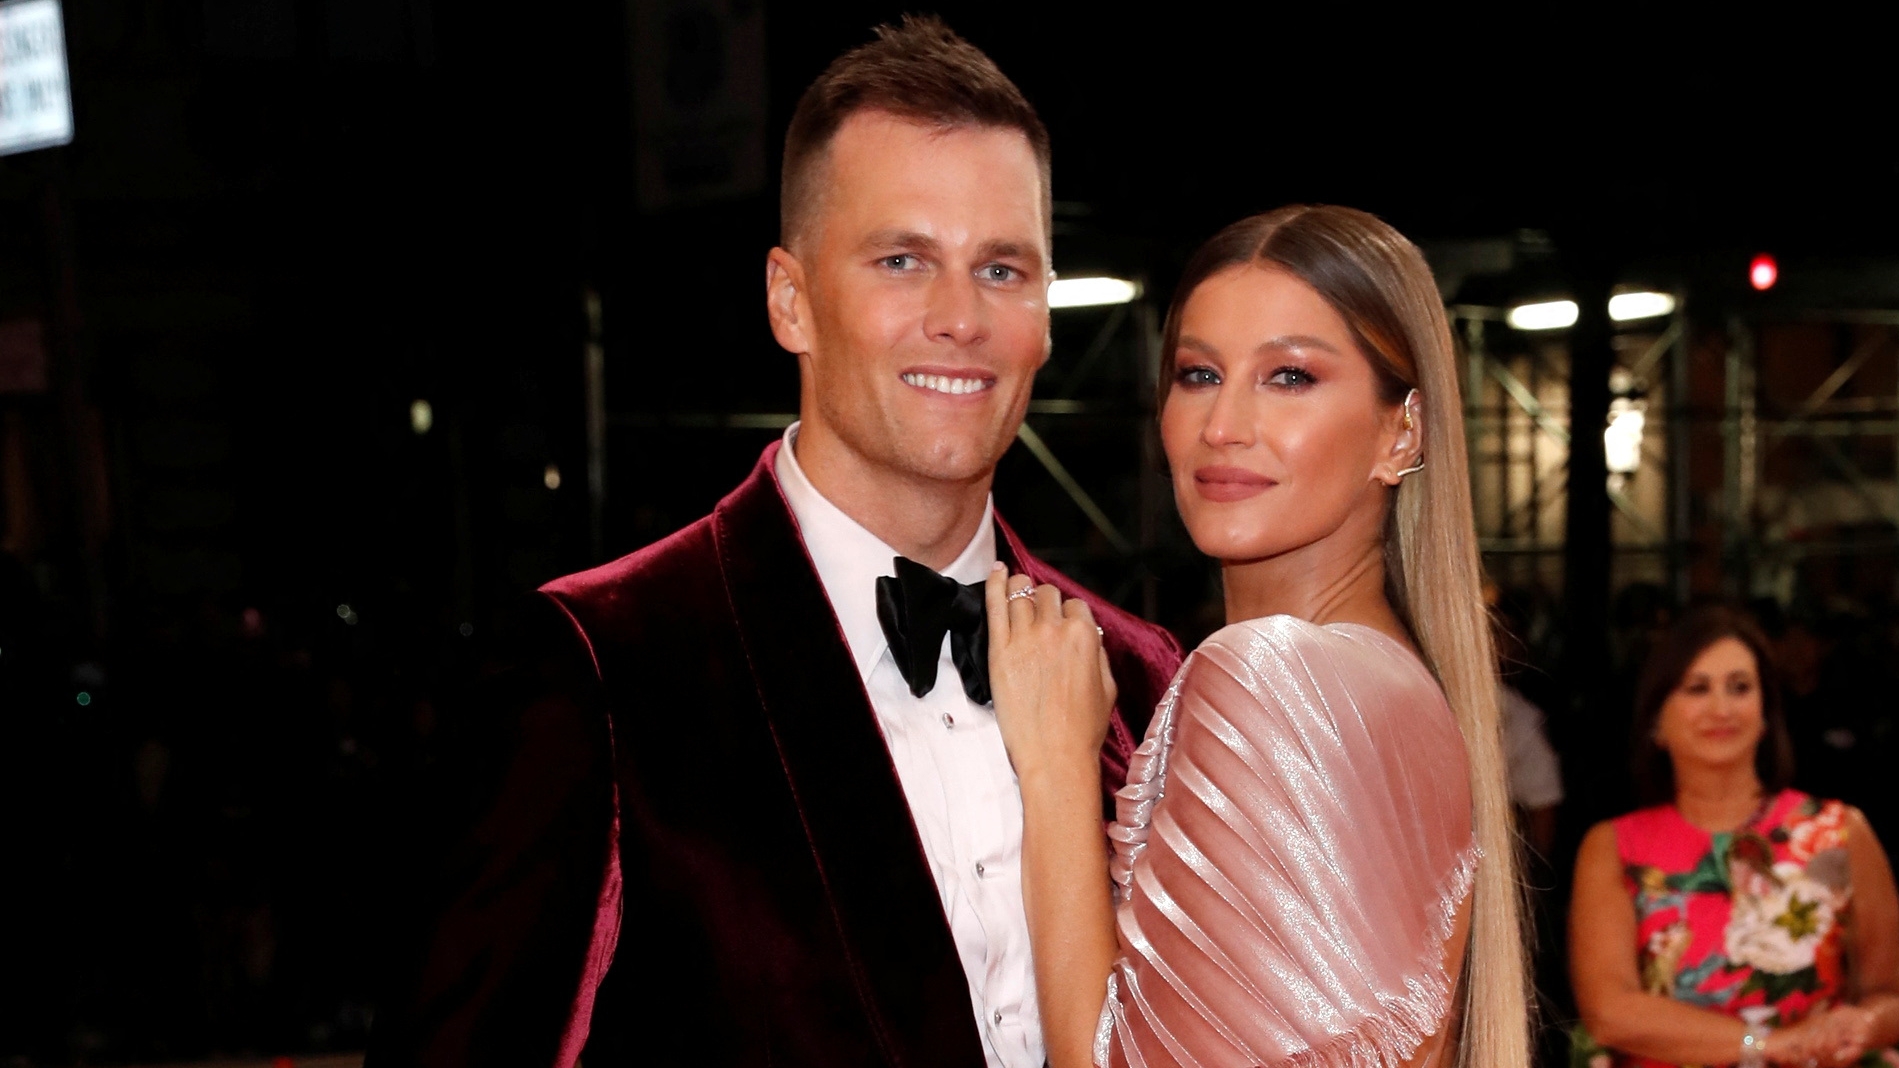 At the end of October, Brady and Bündchen, who married in February 2009 in a private ceremony in Santa Monica, confirmed that they were divorced after 13 years of marriage (Reuters)